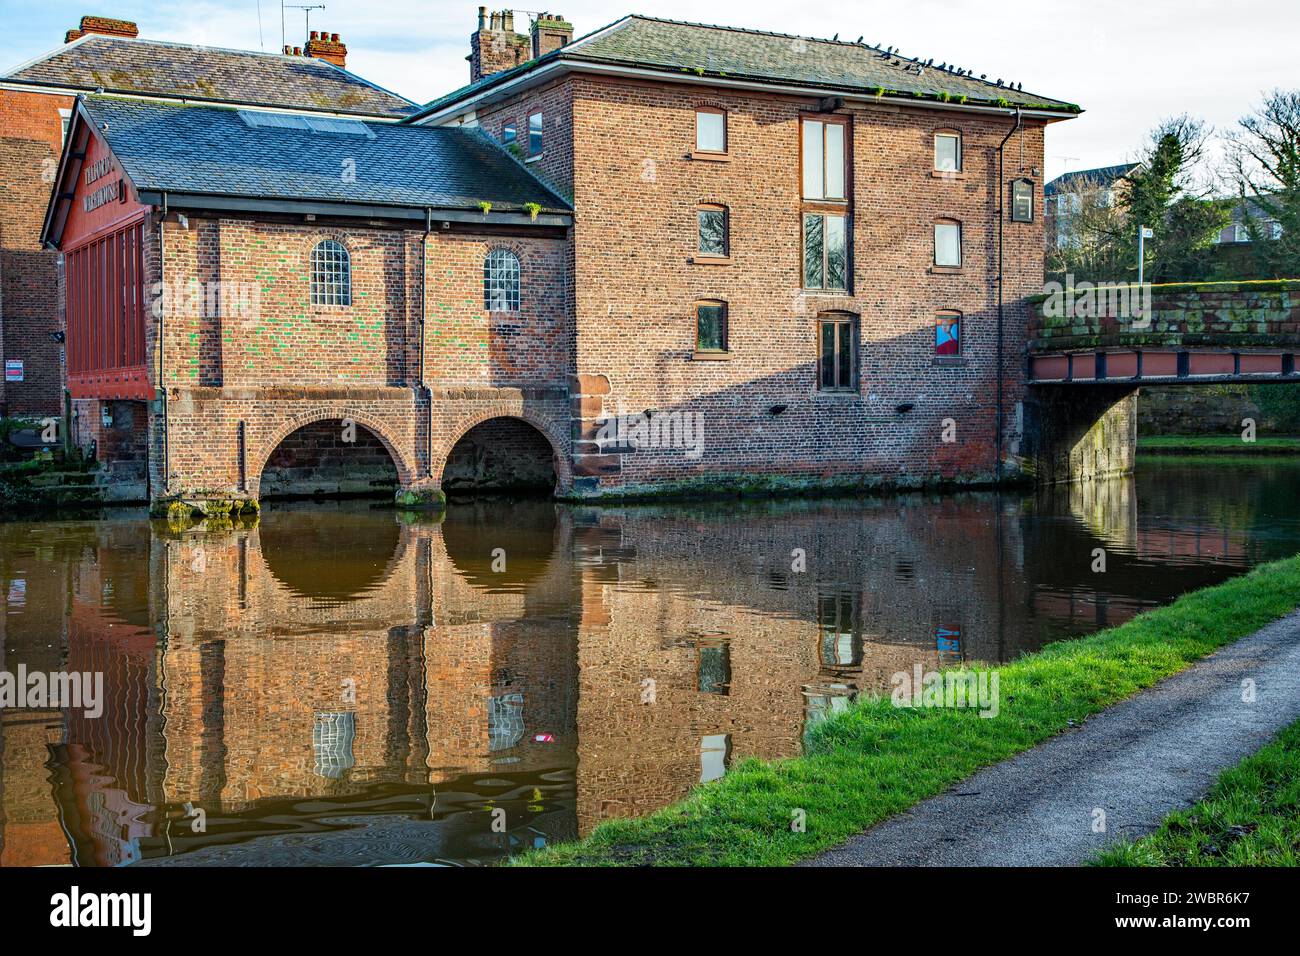 Telfords warehouse, a former canal side warehouse on the Shropshire union canal in the Cheshire city of Chester England UK now a bar and restaurant Stock Photo